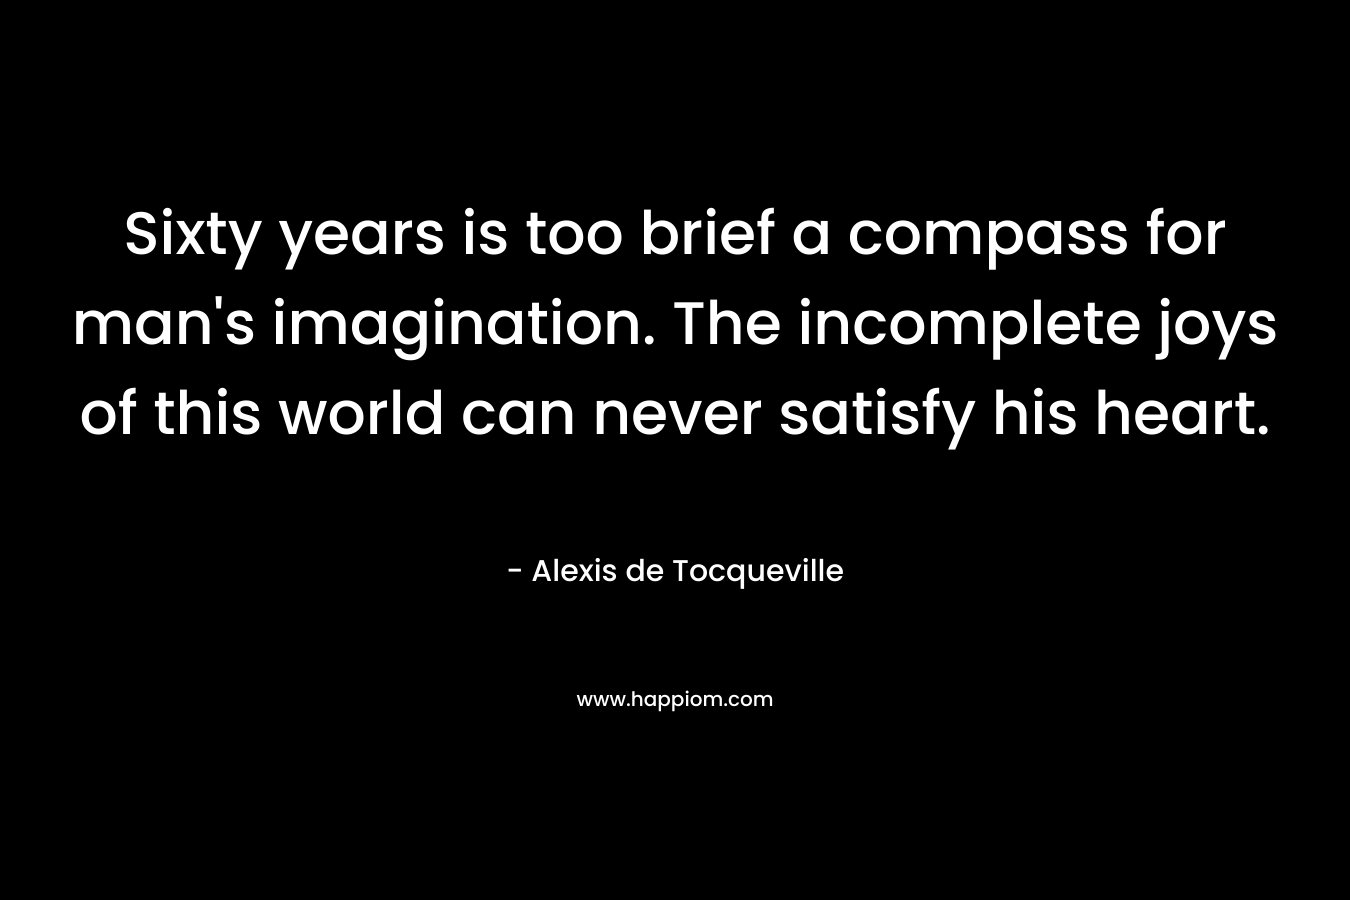 Sixty years is too brief a compass for man’s imagination. The incomplete joys of this world can never satisfy his heart. – Alexis de Tocqueville